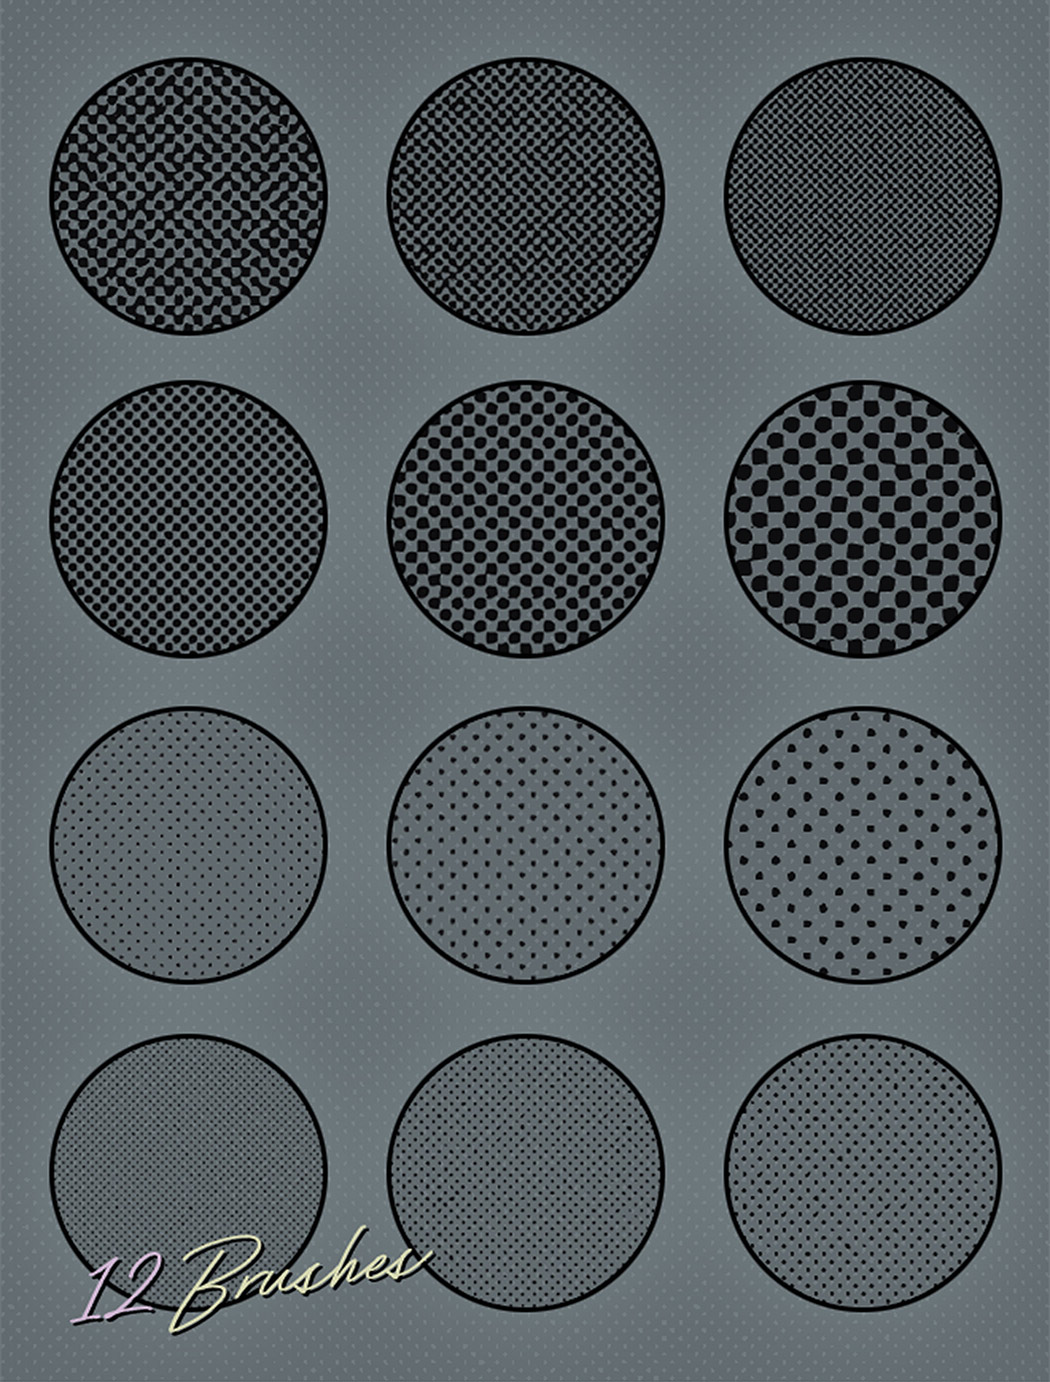 Halftone Texture Brushes for Adobe Photoshop